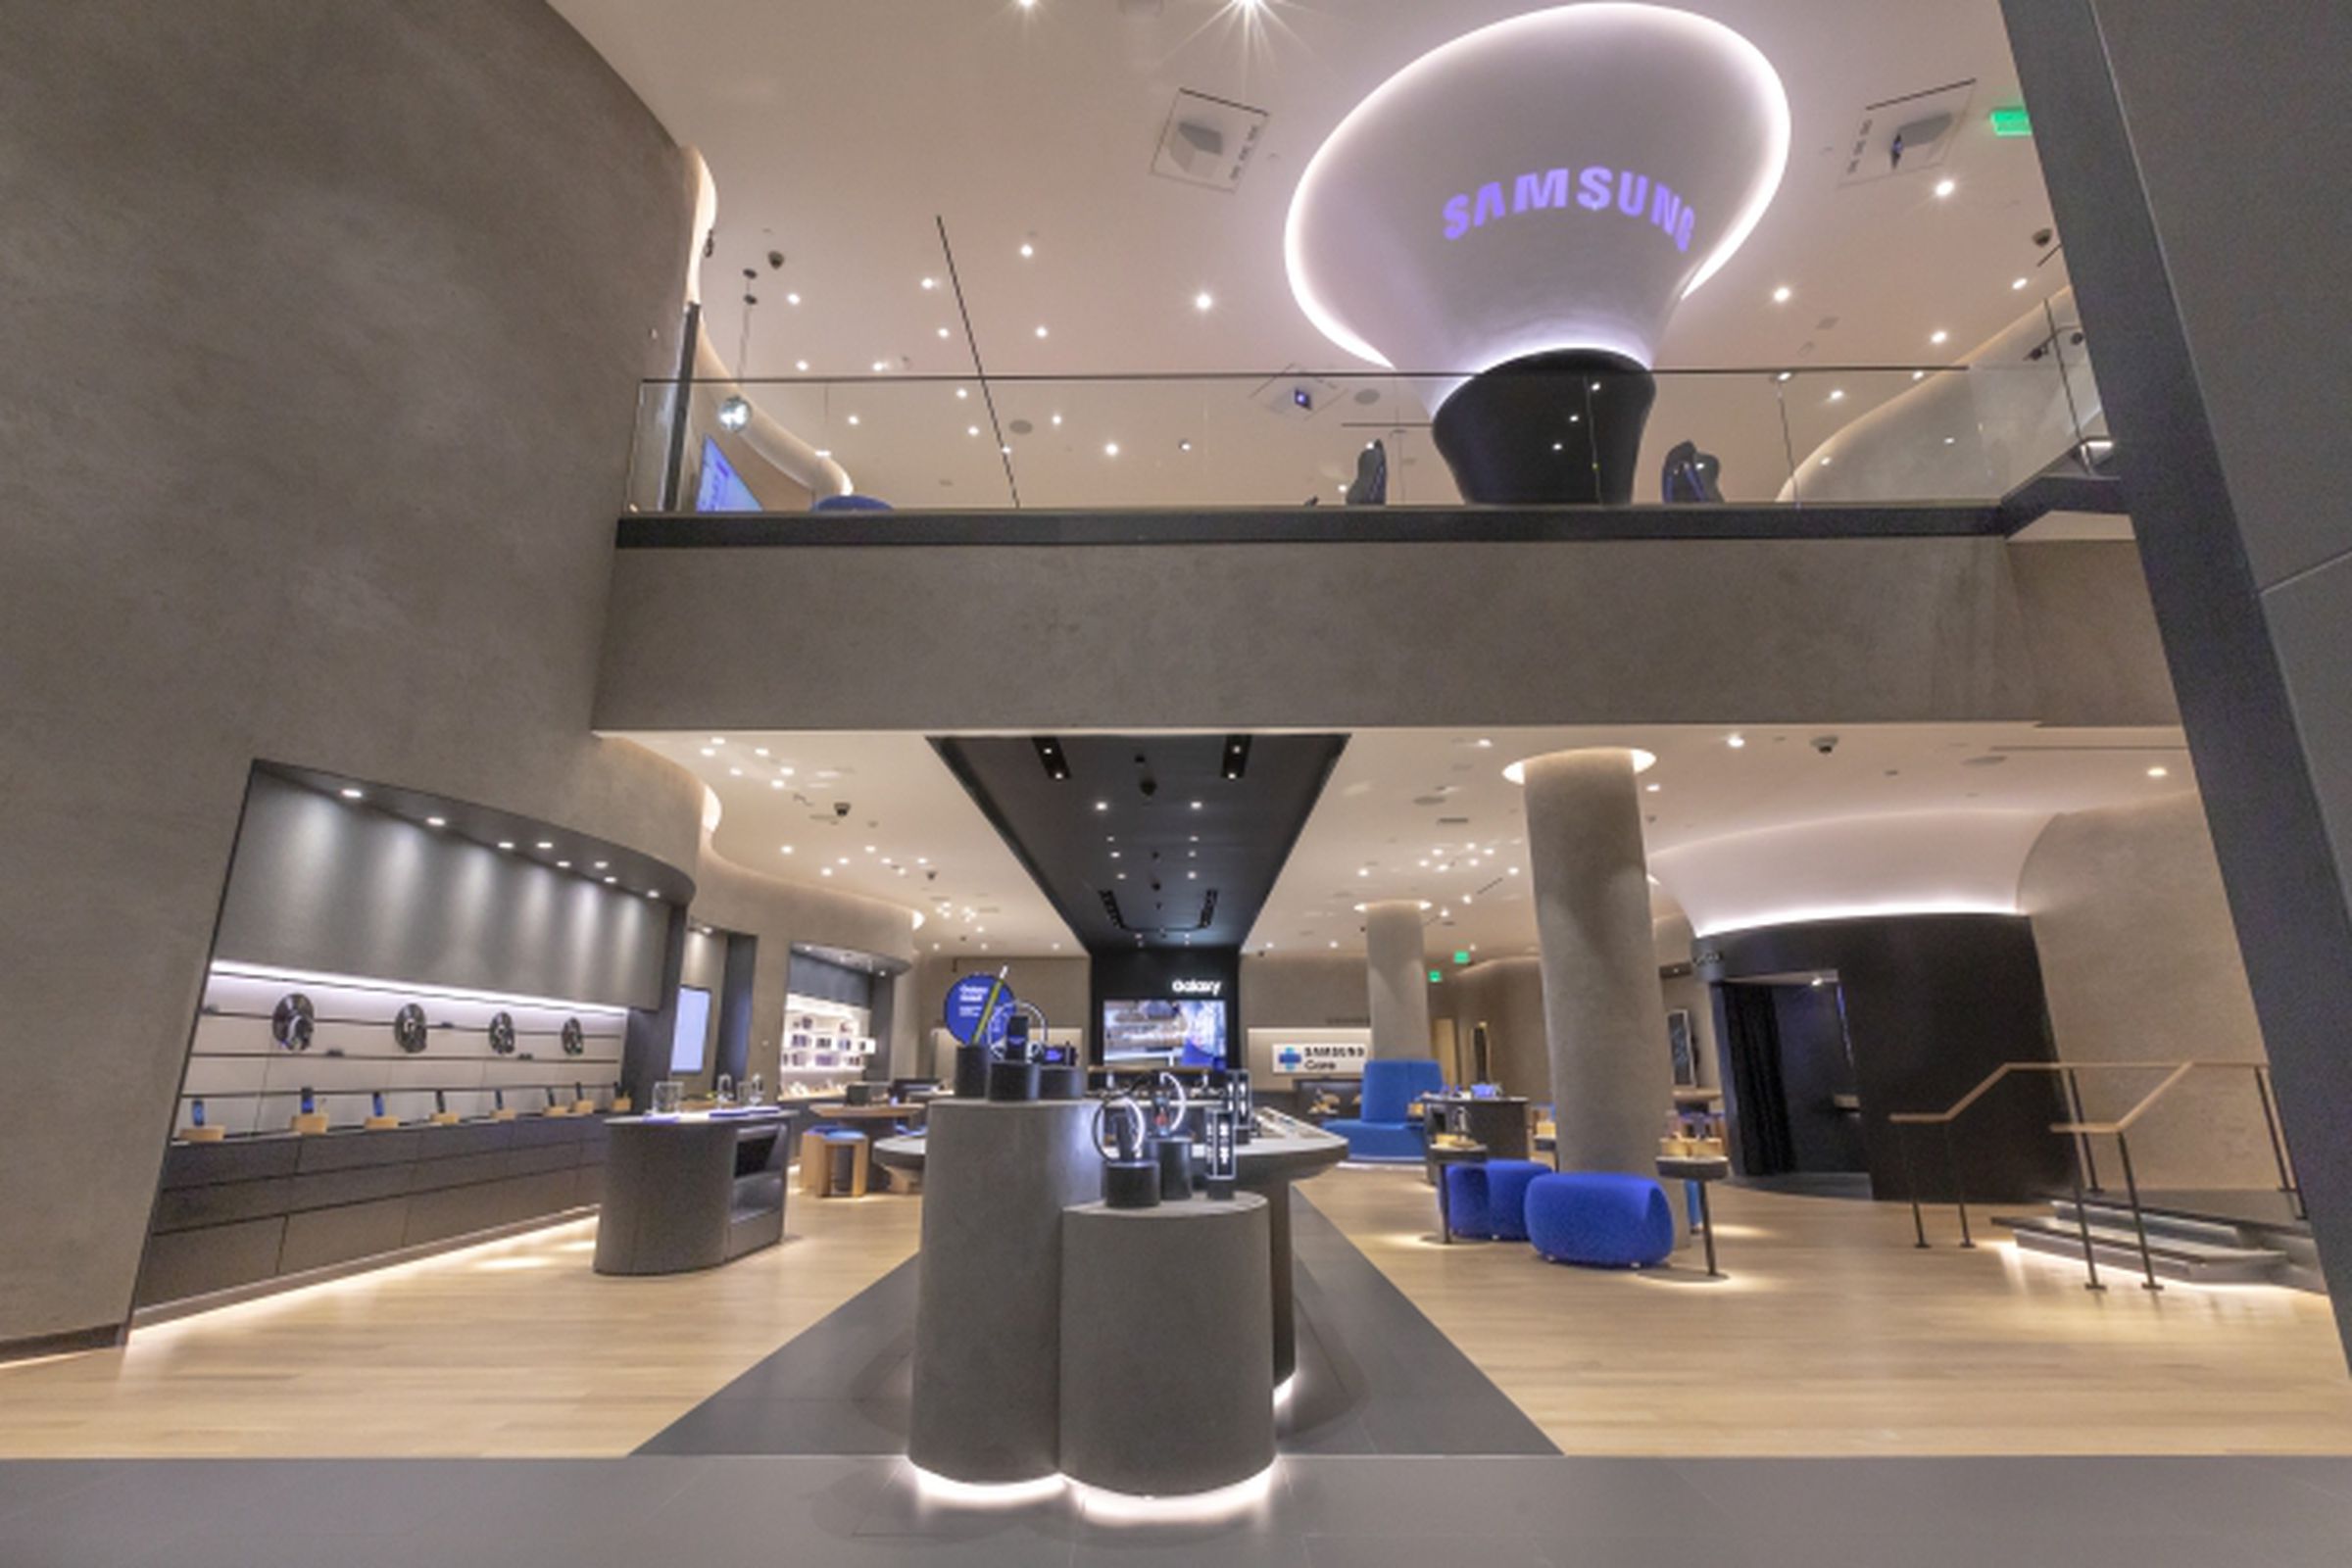 Samsung’s Los Angeles store, shown here, will be one of the three locations.